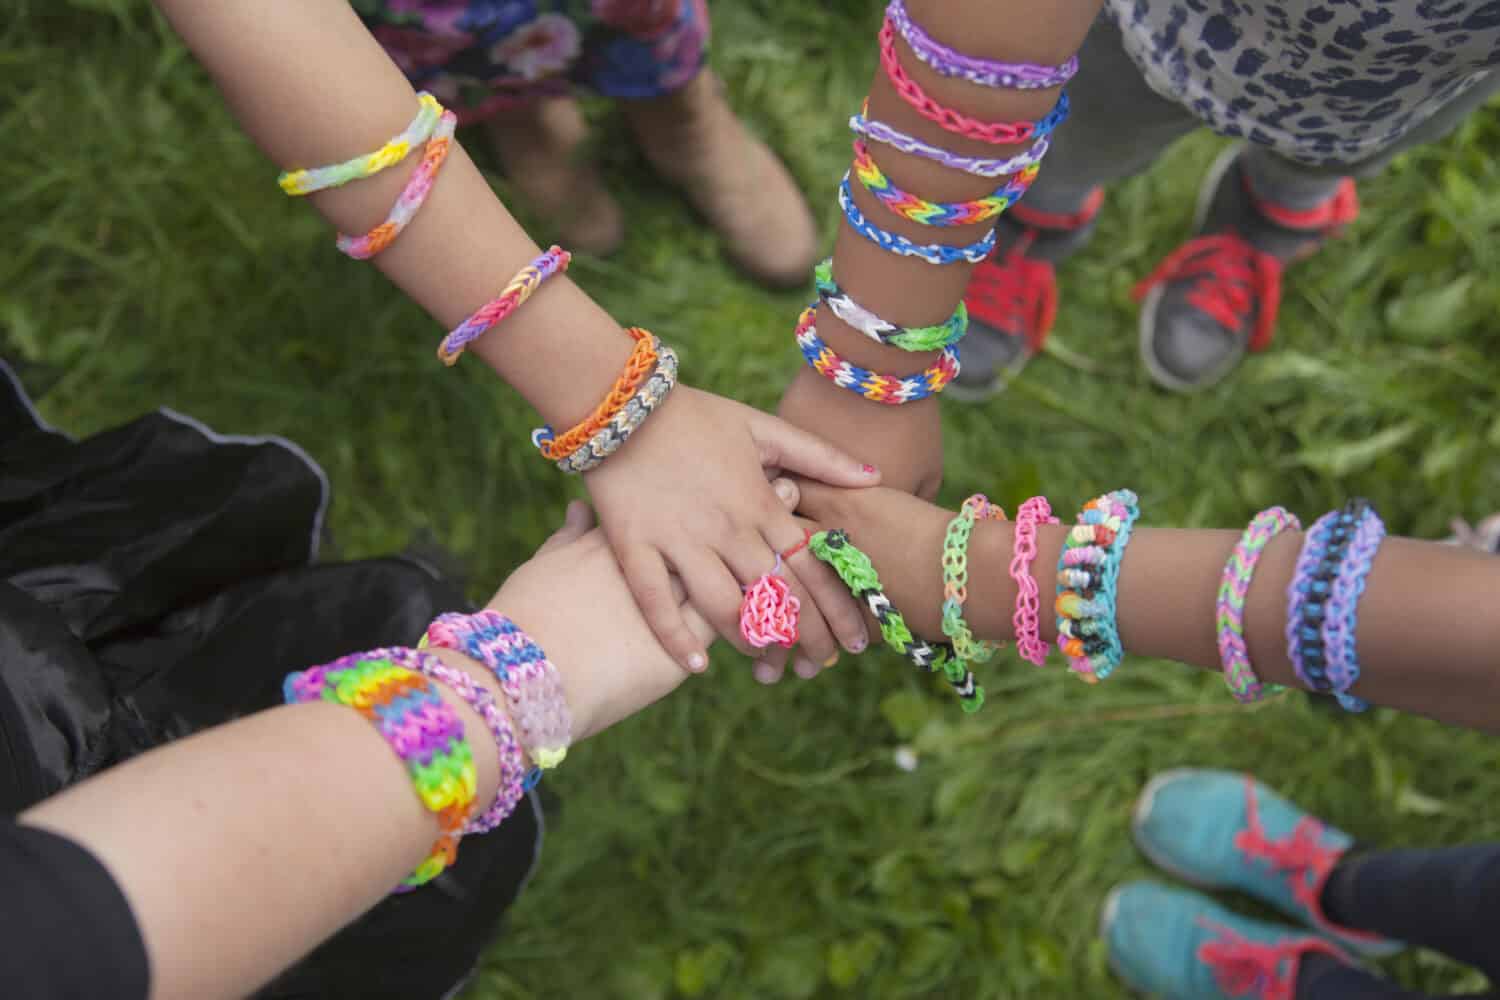 Girls with loom bracelets putting their hands together